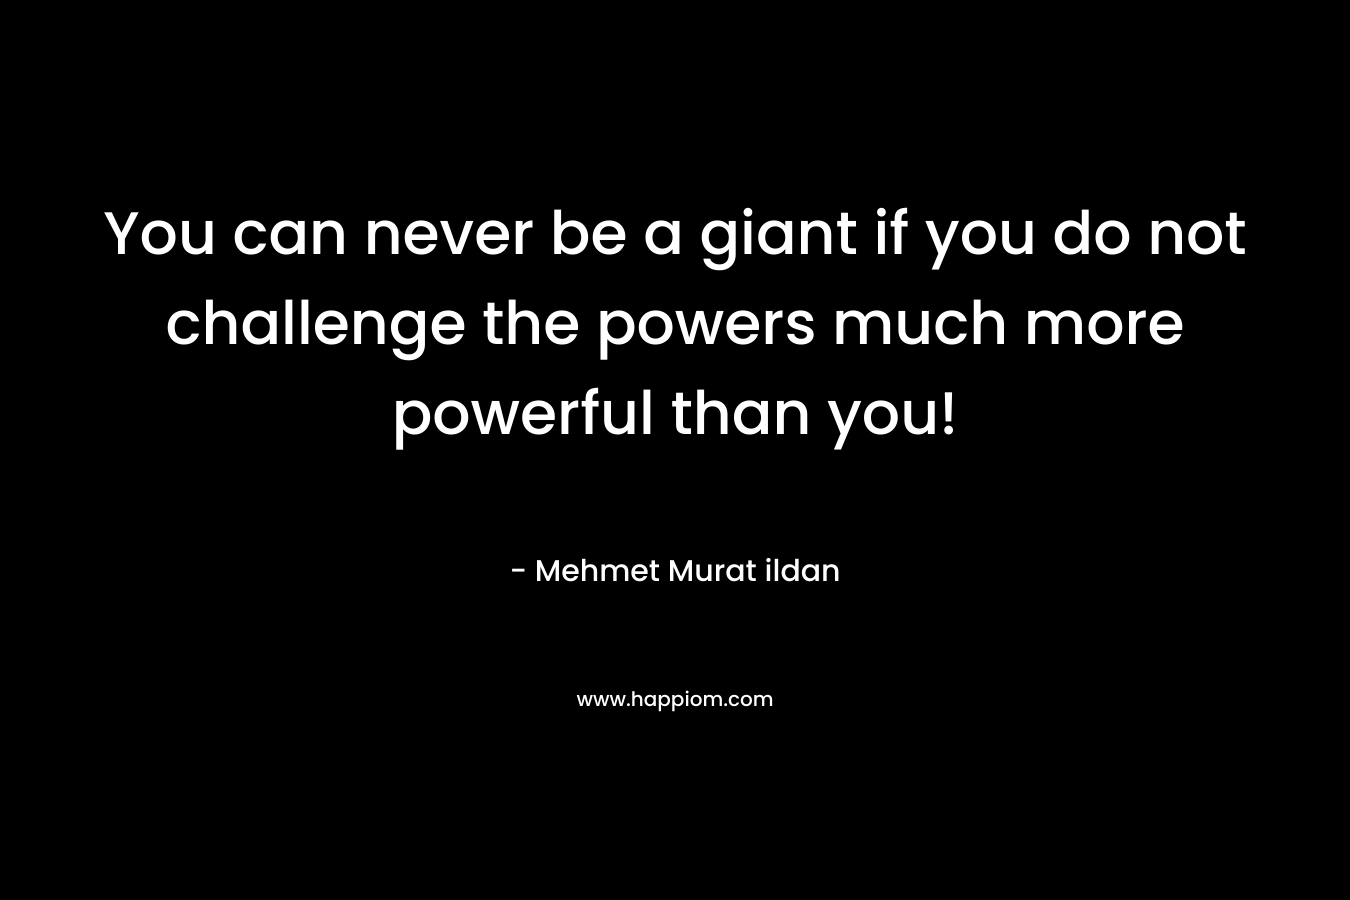 You can never be a giant if you do not challenge the powers much more powerful than you! – Mehmet Murat ildan